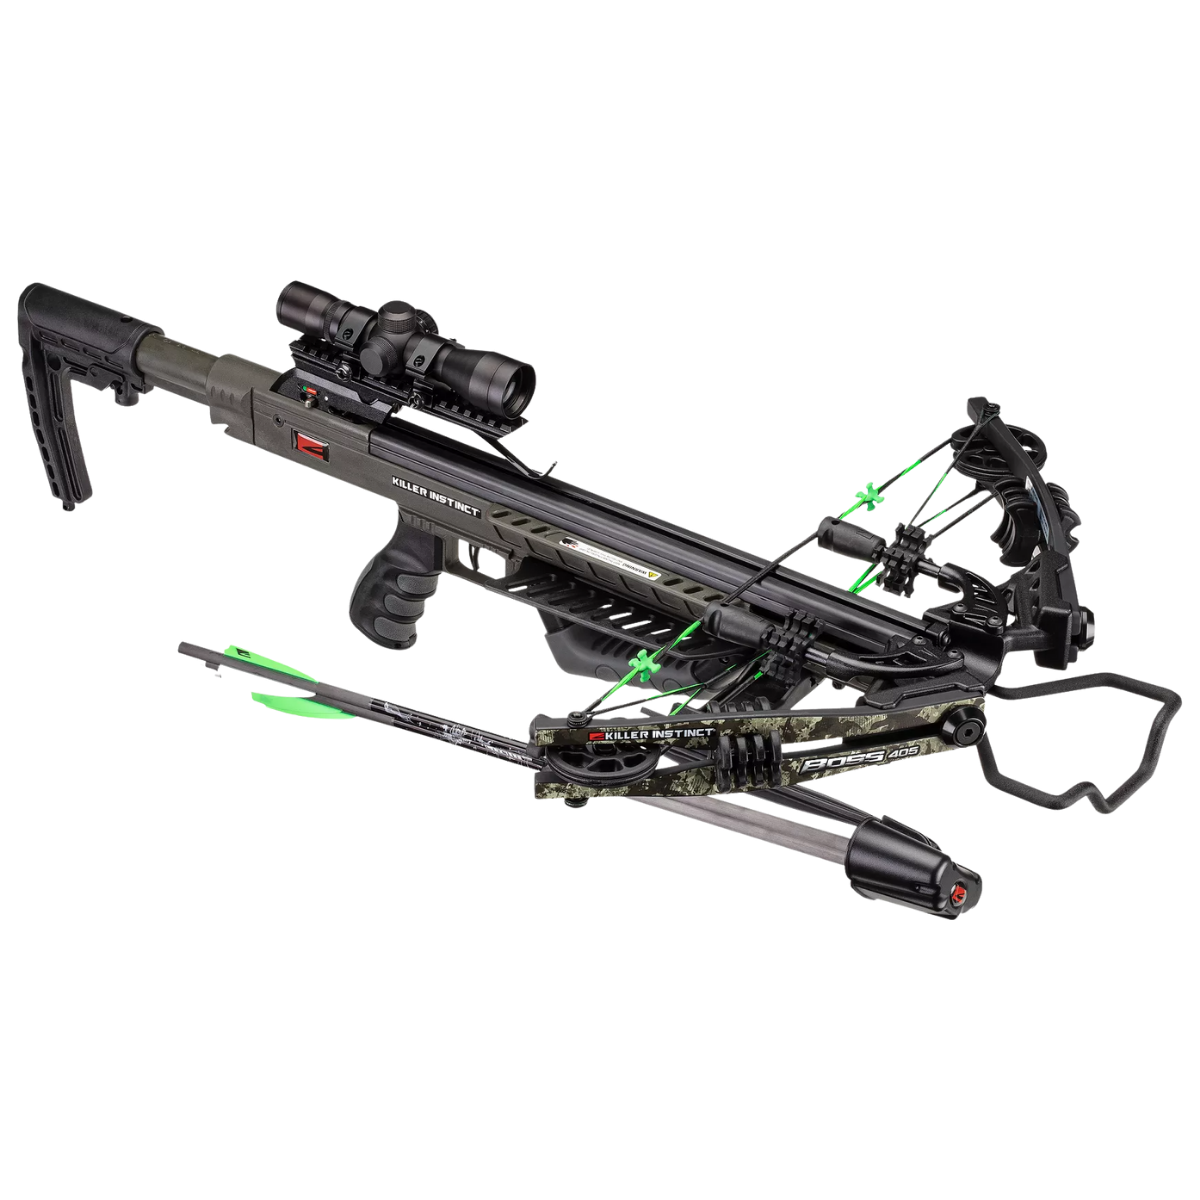 Killer Instinct Boss 405 Compound Crossbow Package 405fps - Fast UK Shipping | Tactical Archery UK